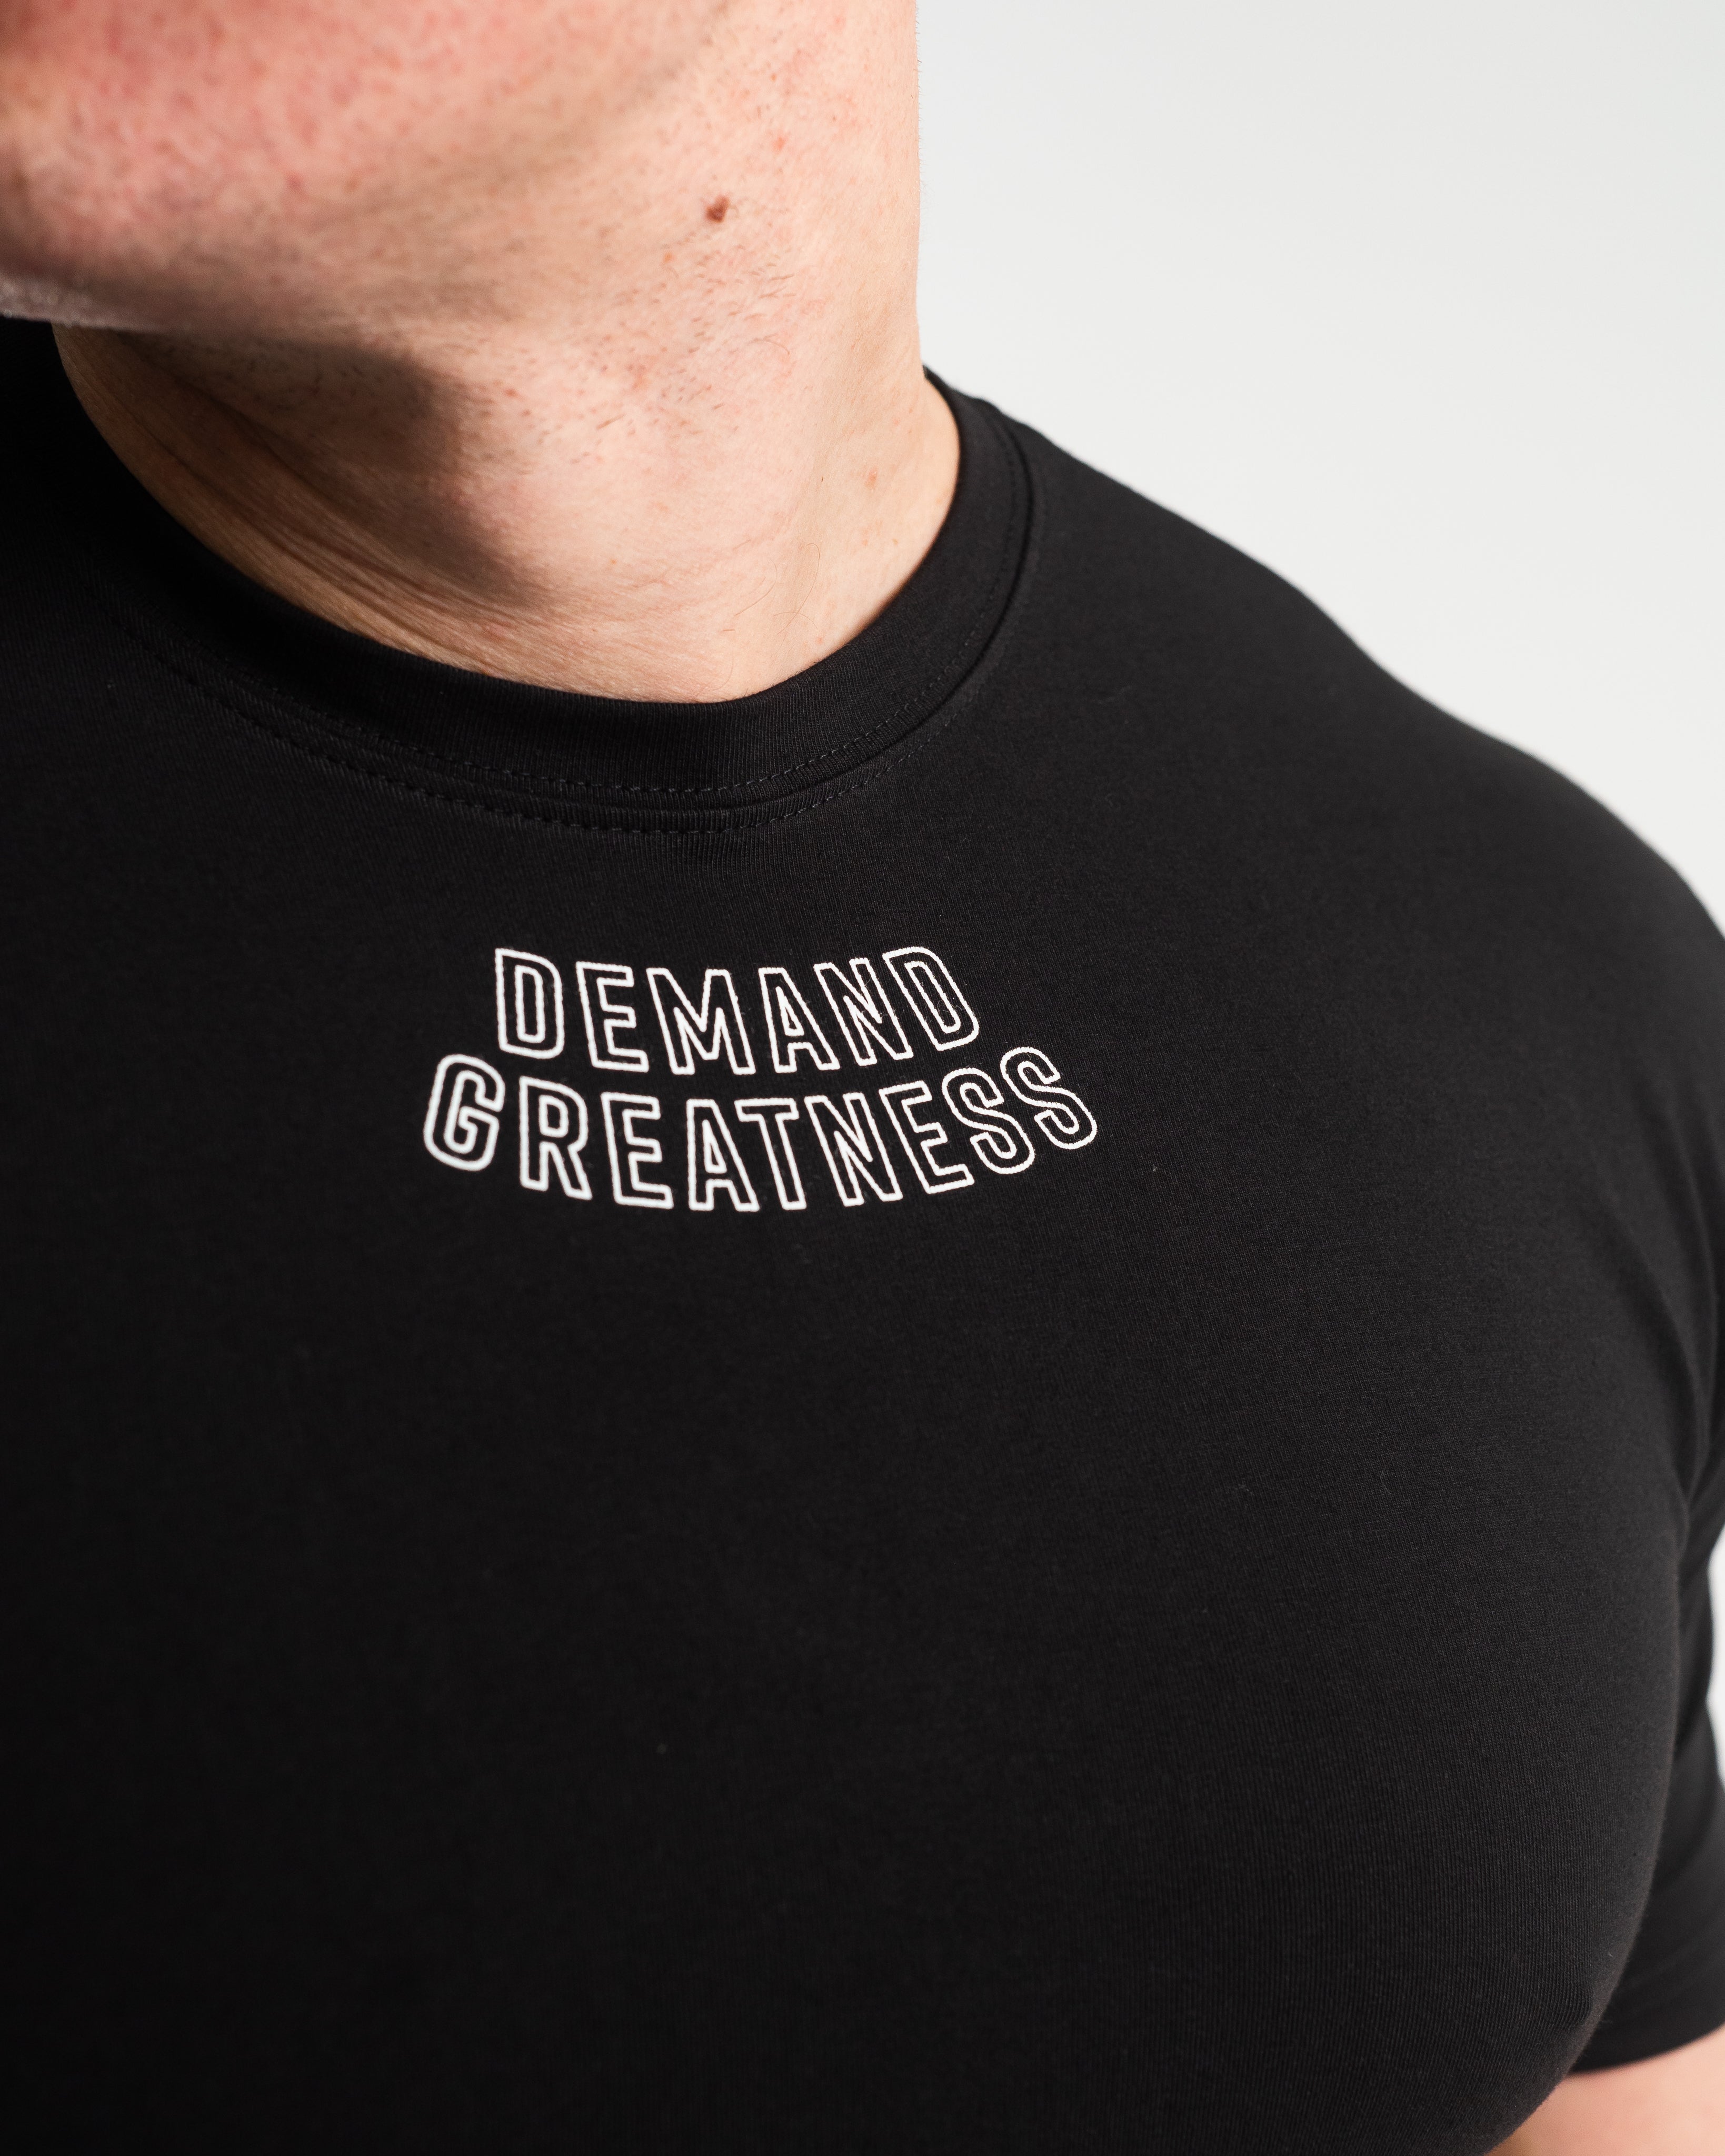 DG23 Domino is our new meet shirt design highlighting Demand Greatness with a double outline font to showcase your impact on the platform. The DG23 Meet Shirt is IPF Approved. Shop the full A7 Powerlifting IPF Approved Equipment collection. The IPF Approved Kit includes Powerlifting Singlet, A7 Meet Shirt, A7 Zebra Wrist Wraps, A7 Deadlift Socks, Hourglass Knee Sleeves (Stiff Knee Sleeves and Rigor Mortis Knee Sleeves). All A7 Powerlifting Equipment shipping to UK, Norway, Switzerland and Iceland.